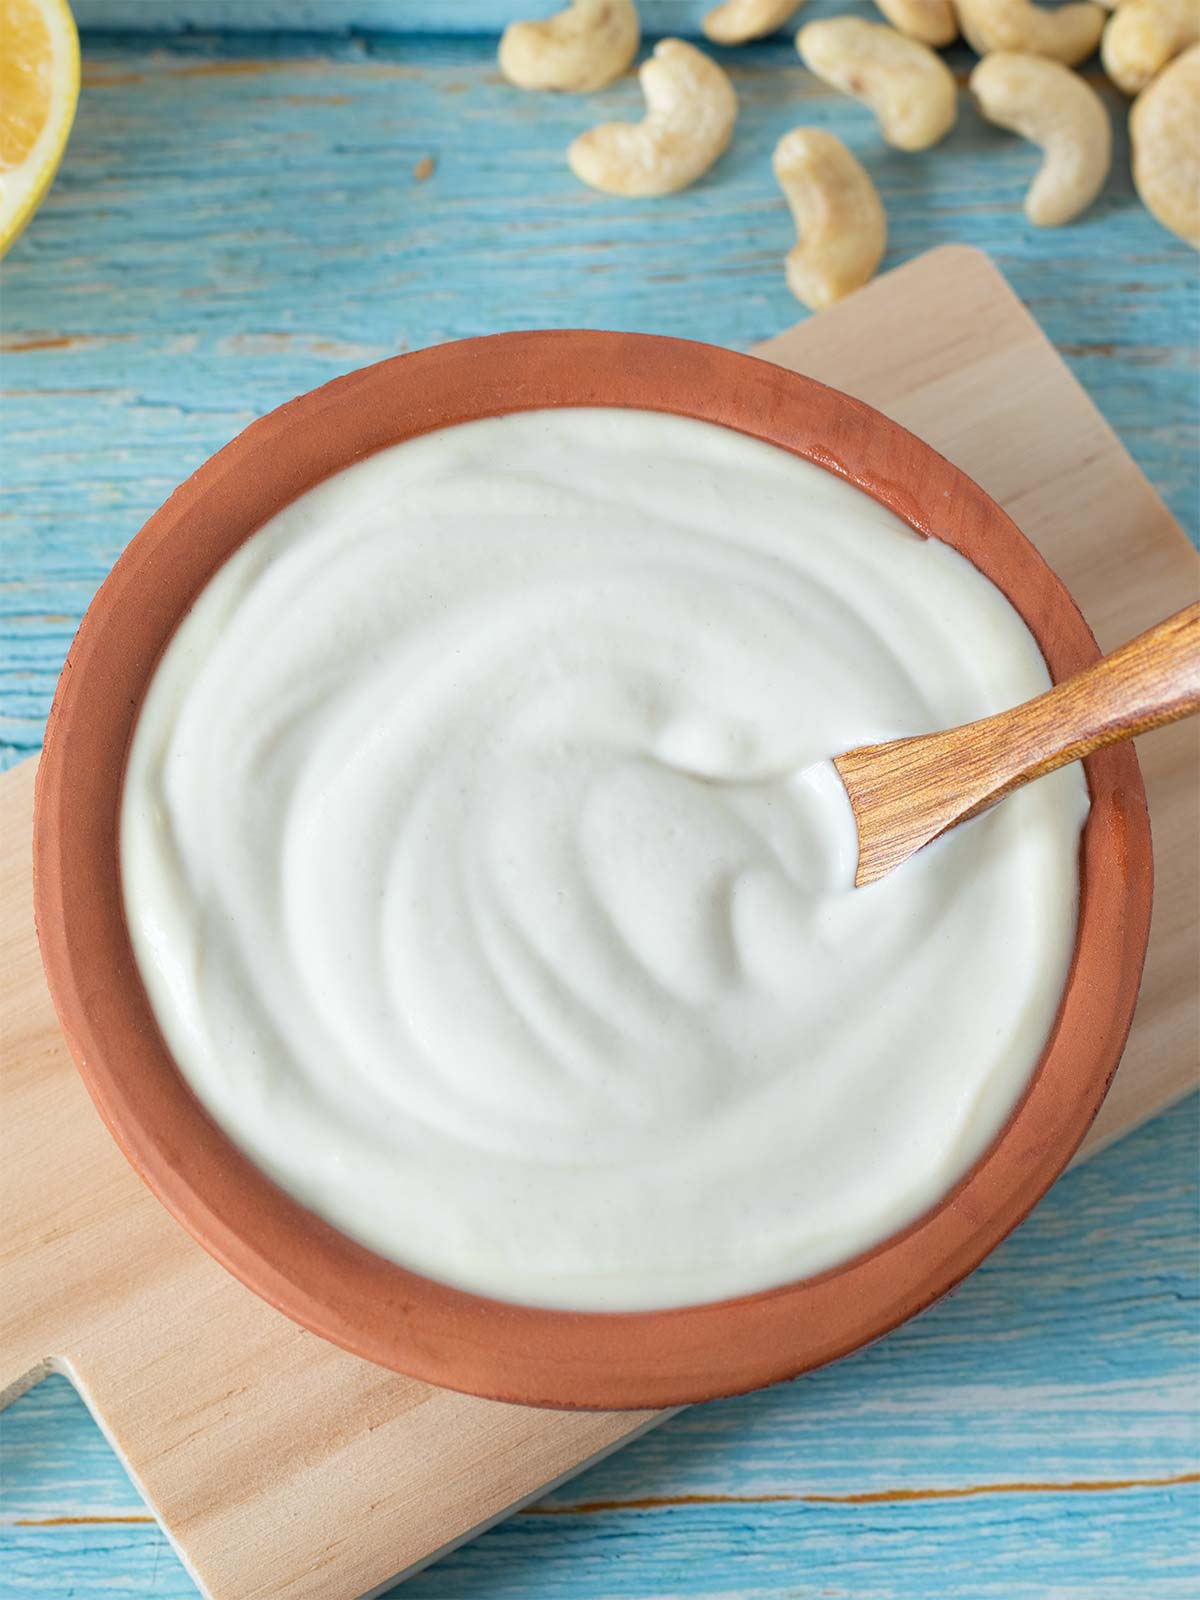 Creamy plant-based cashew-based dip in a bowl with wooden spoon used as a substitute for sour cream